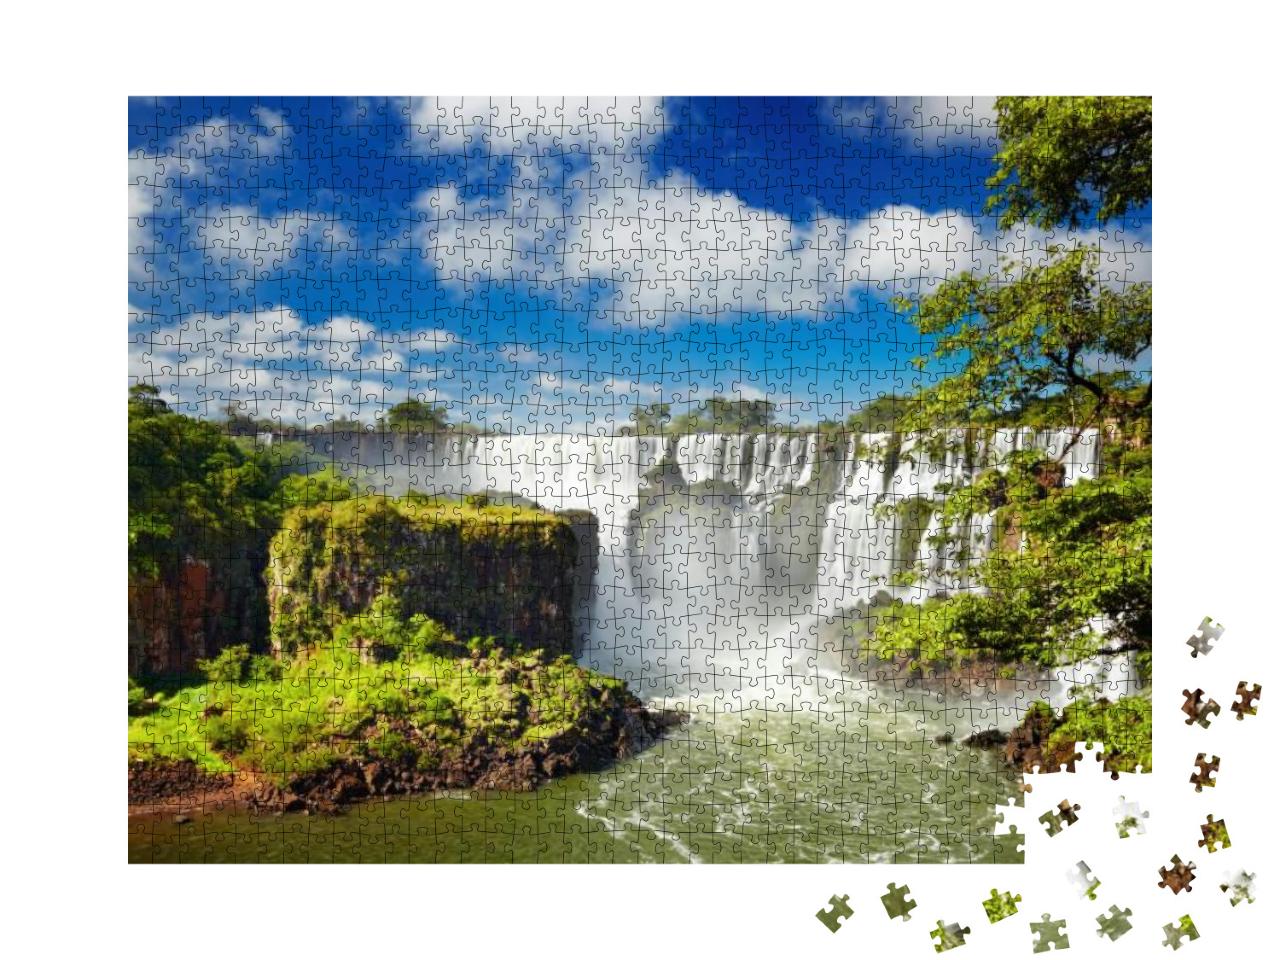 Iguassu Falls, the Largest Series of Waterfalls of the Wo... Jigsaw Puzzle with 1000 pieces